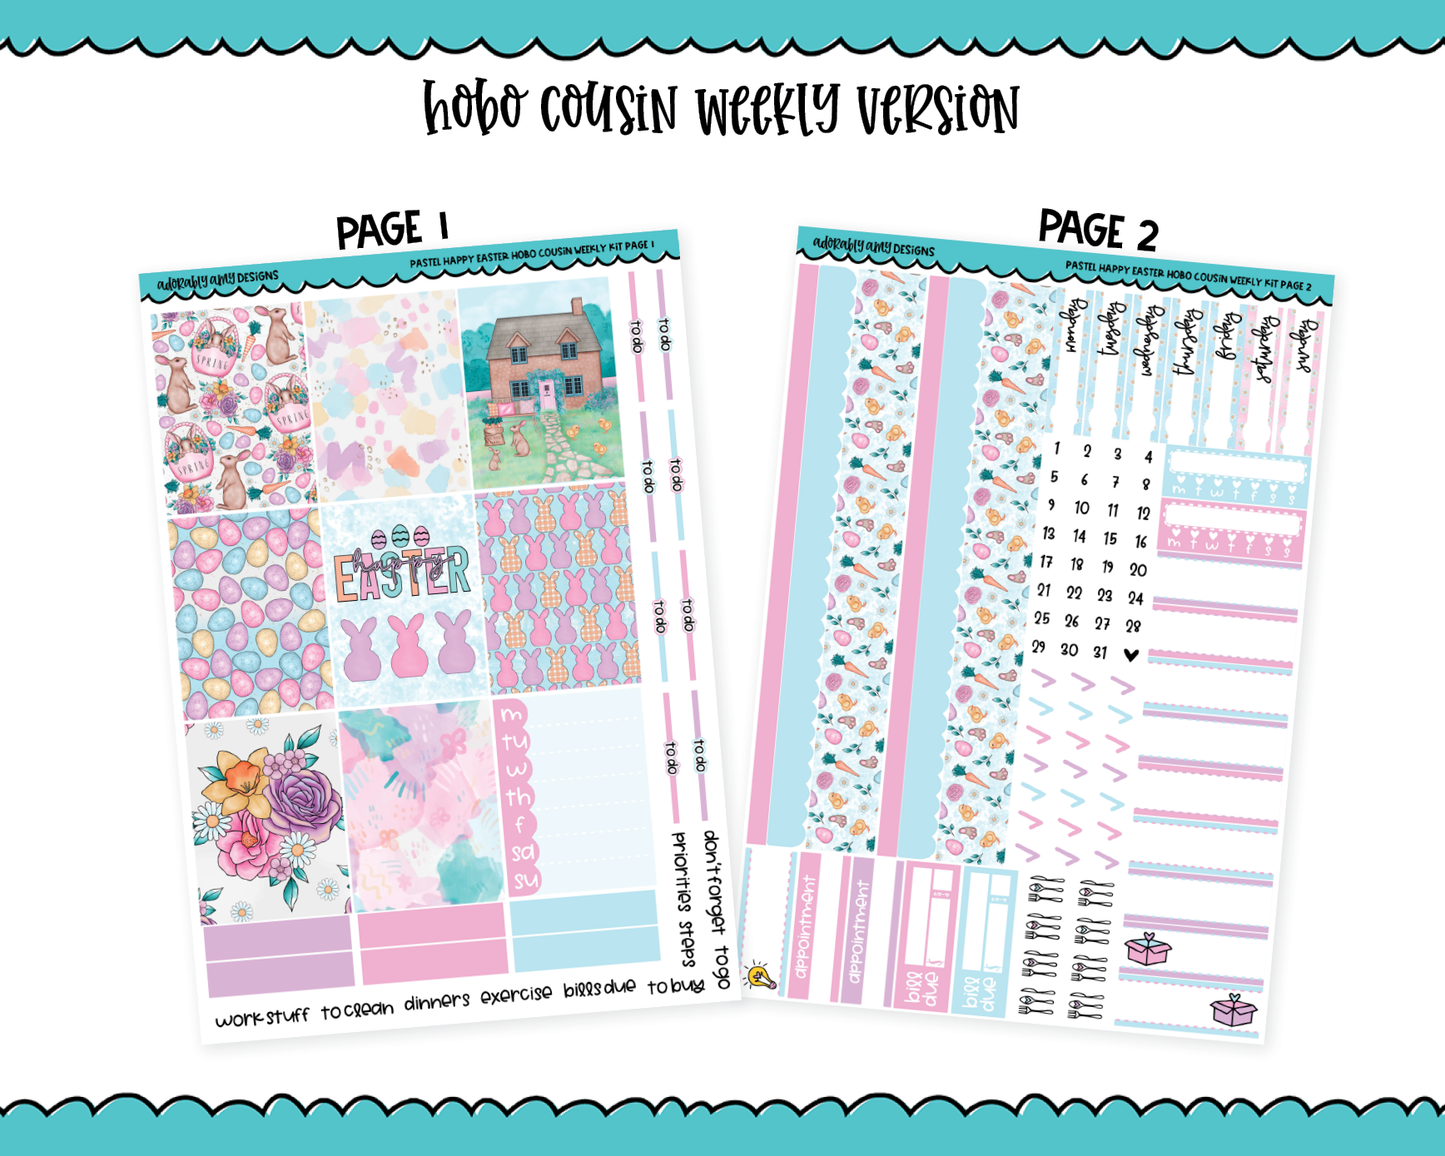 Hobonichi Cousin Weekly Pastel Happy Easter Spring Themed Planner Sticker Kit for Hobo Cousin or Similar Planners